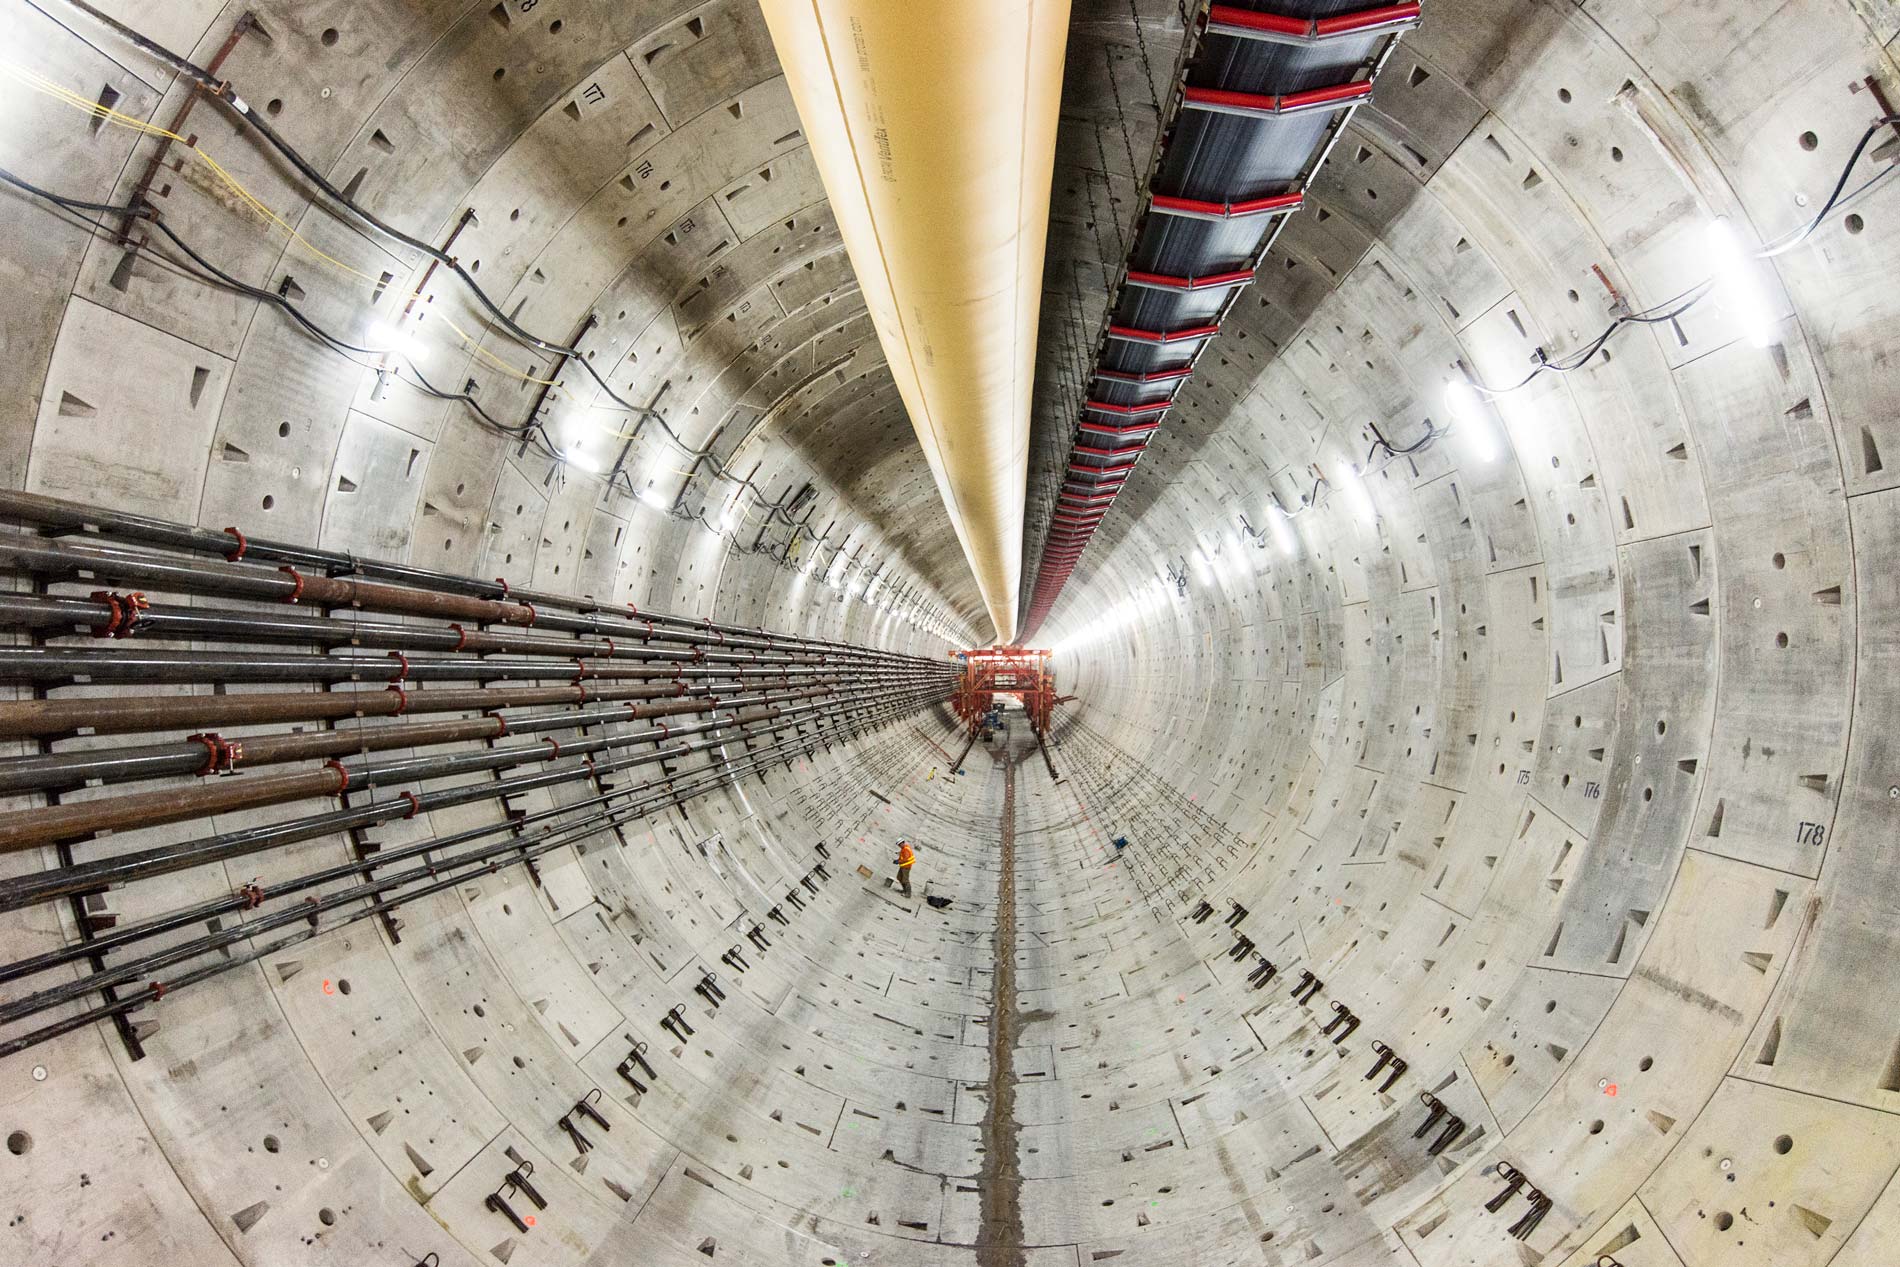 SR 99 Tunnel Replacement